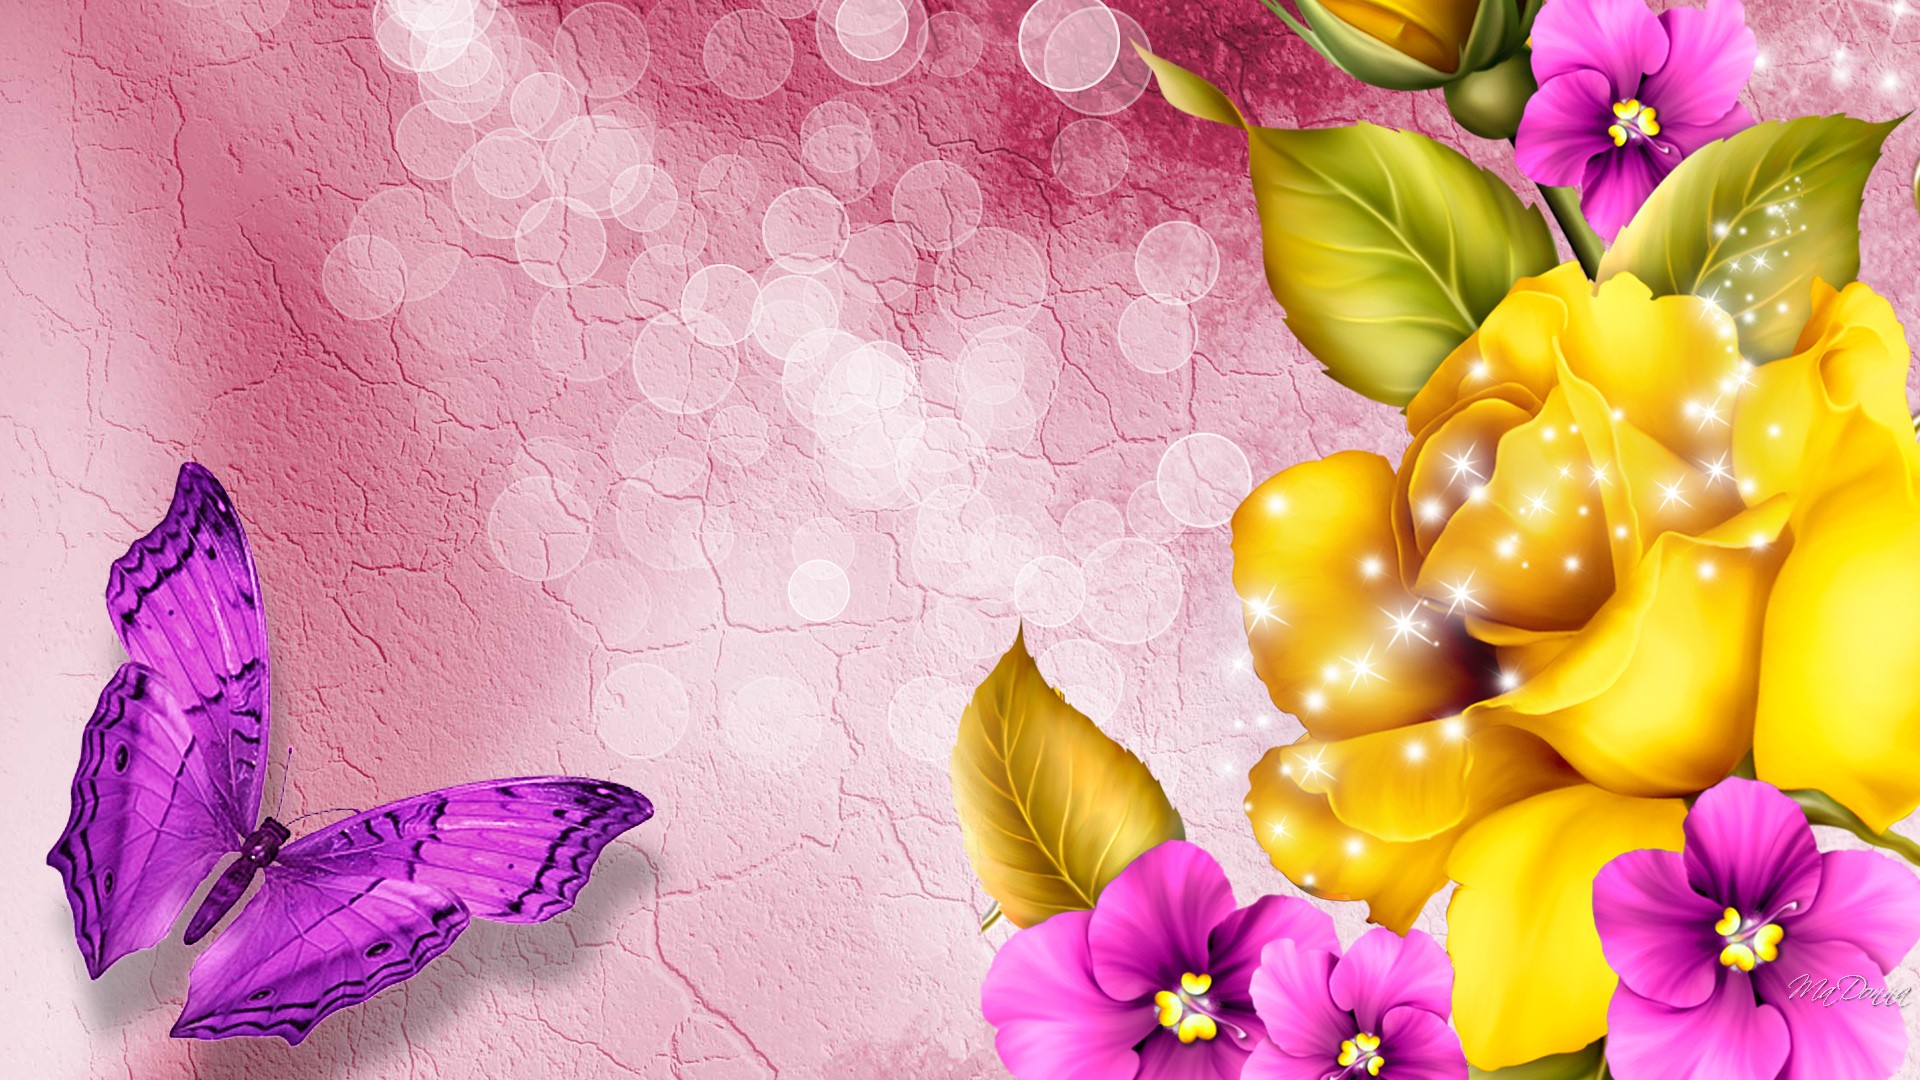 Colorful Butterfly Wallpaper